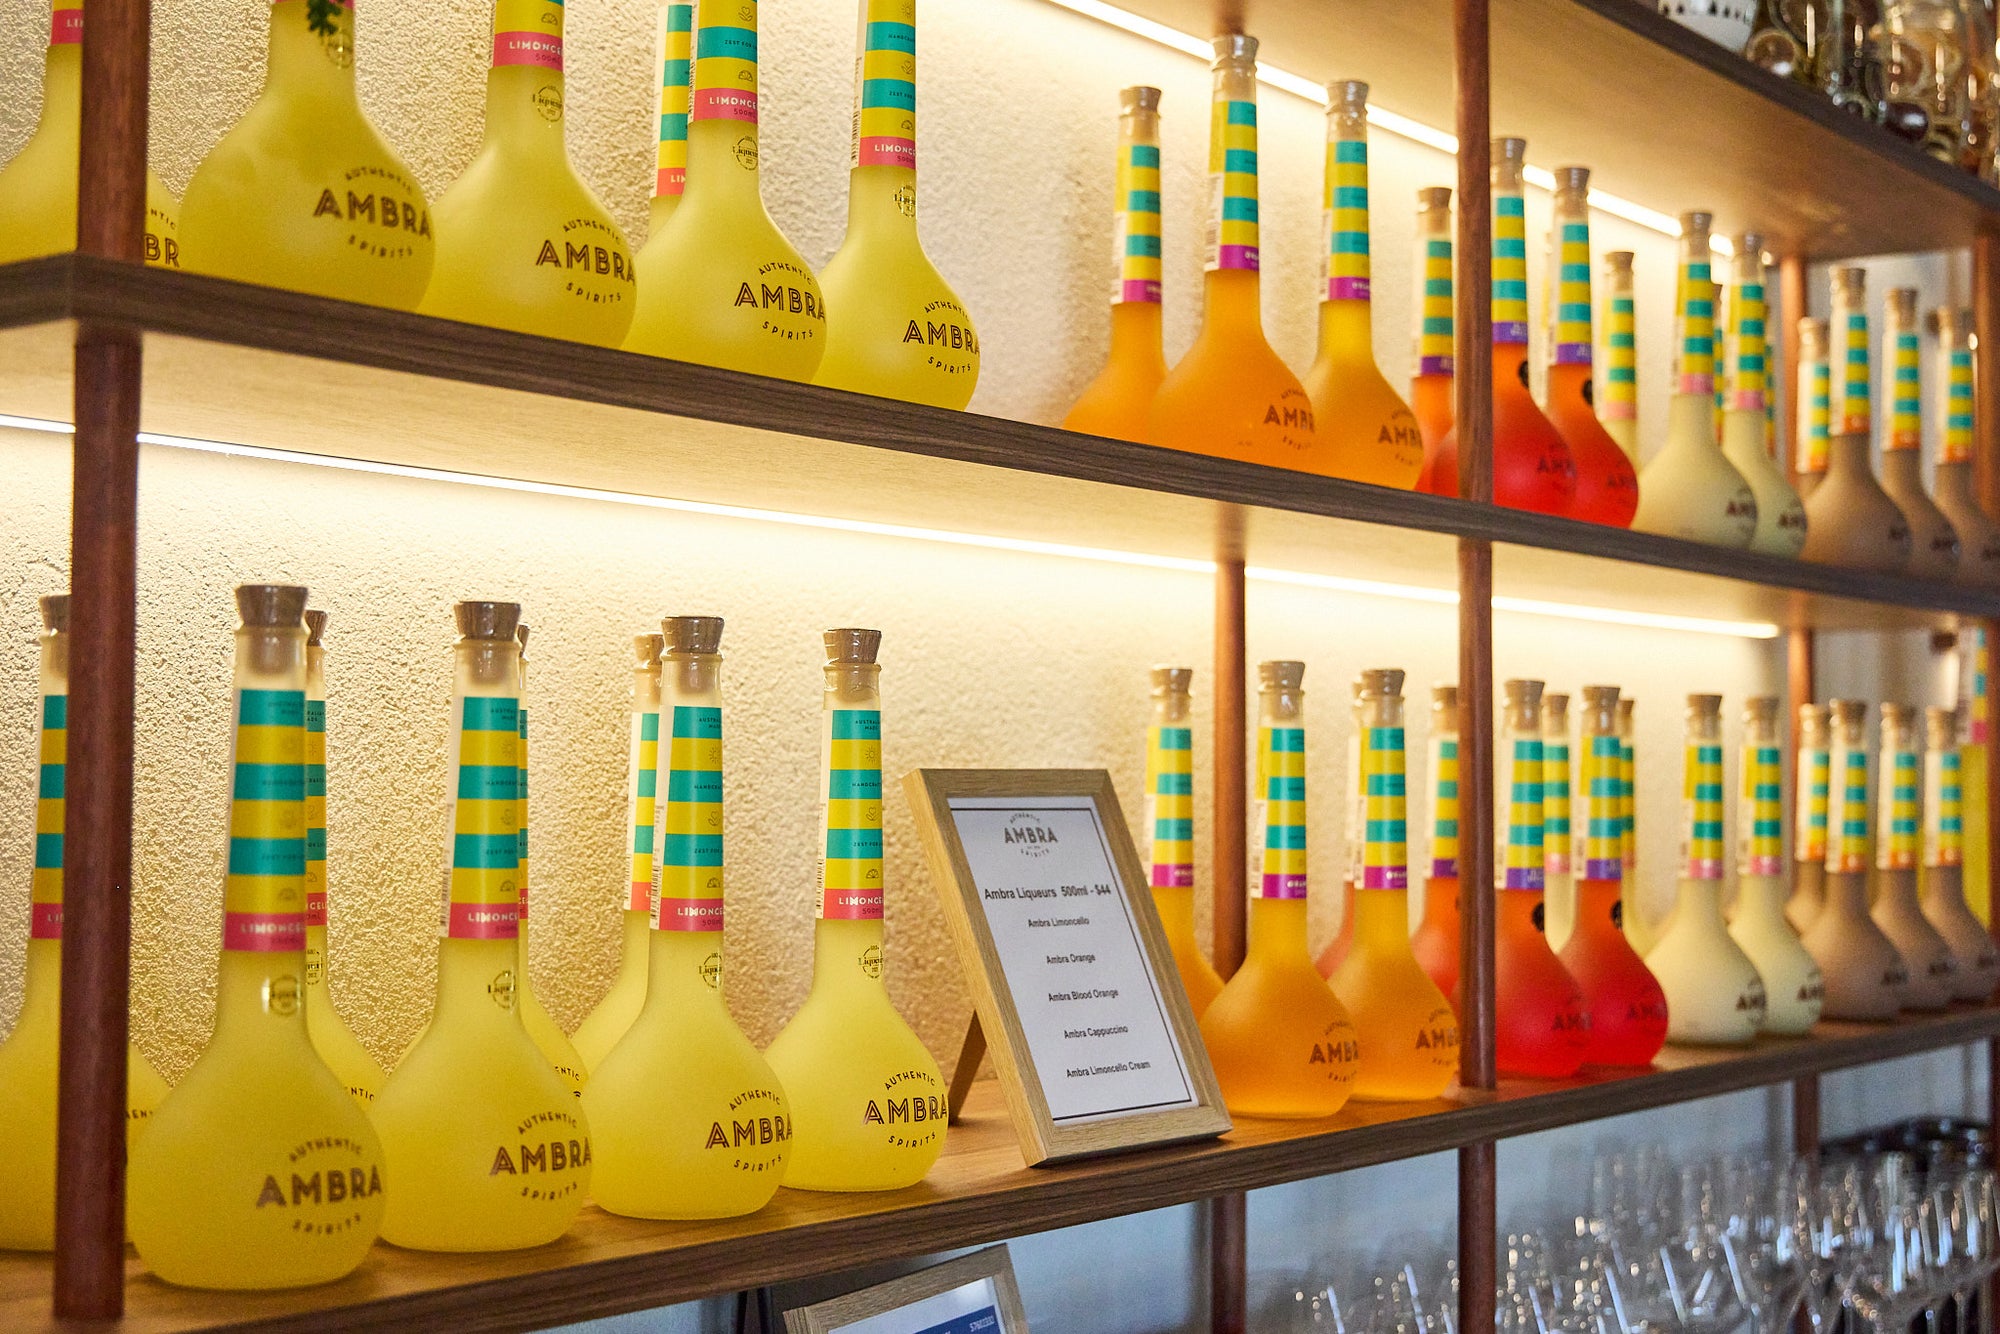 Experience that fresh feeling at the recently refurbished Ambra Spirits Distillery in Thebarton!